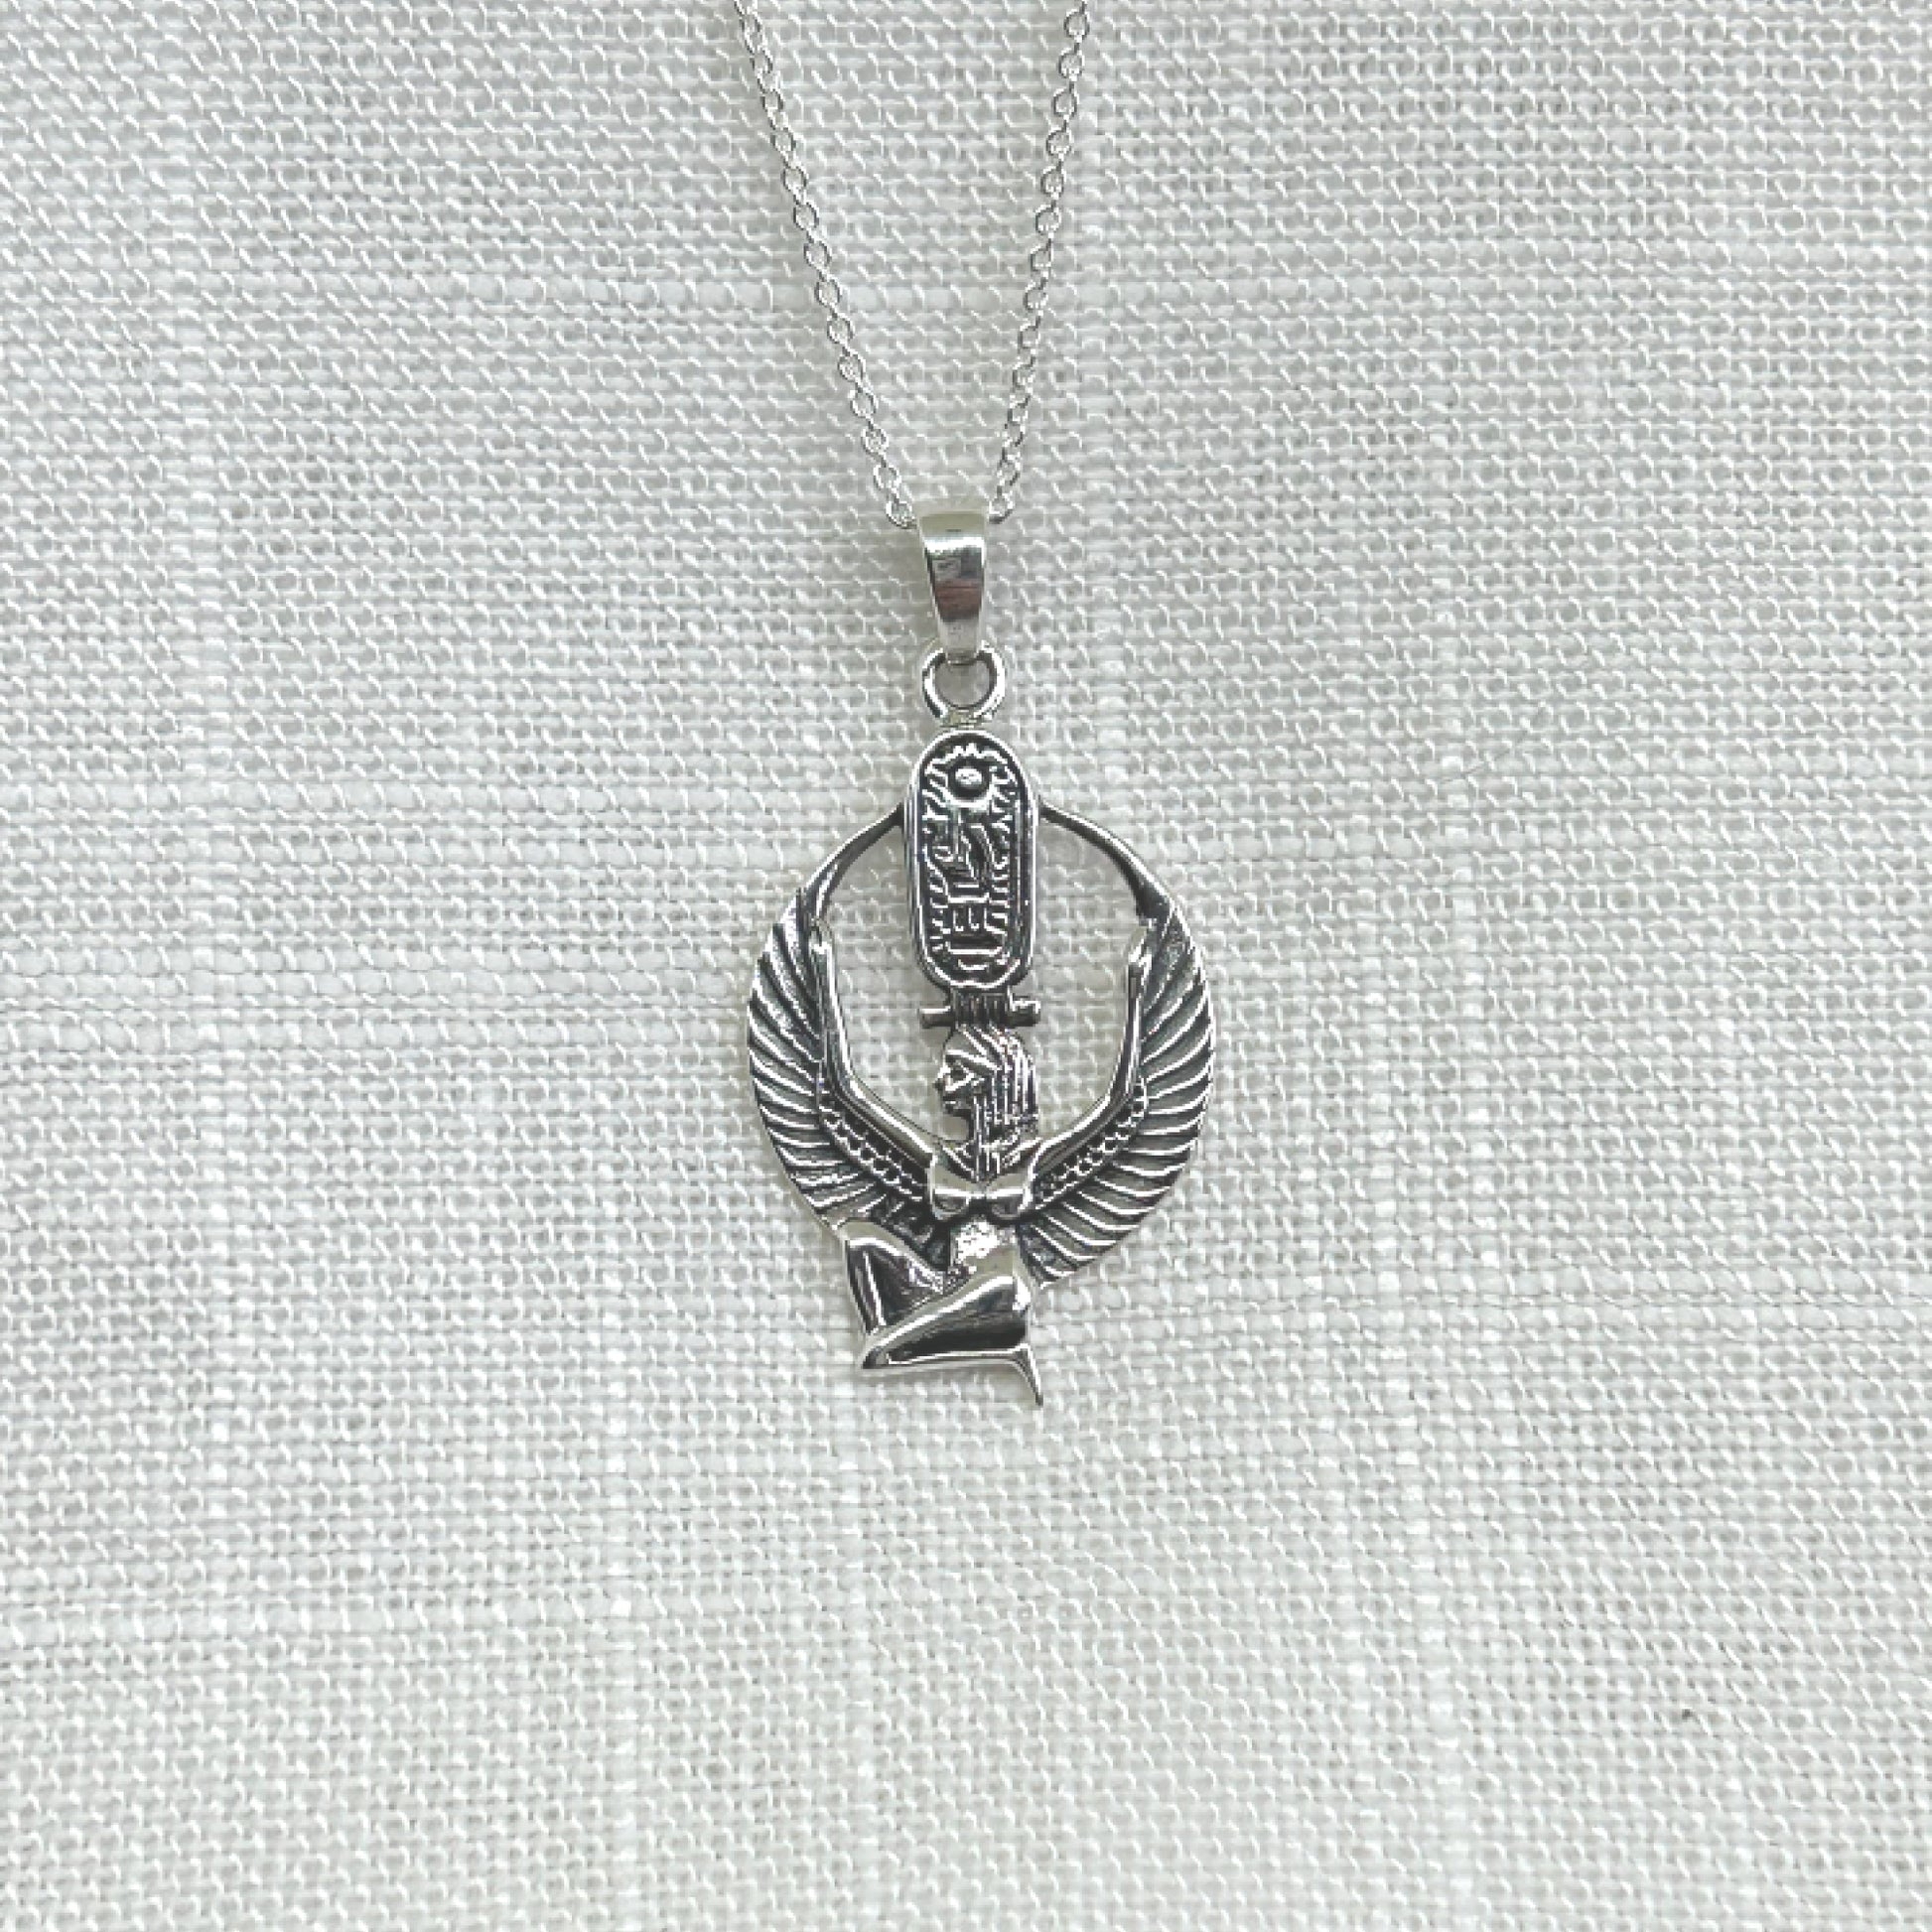 This handmade 925 silver kneeling ancient Egyptian Goddess Isis pendant features hieroglyphics on her throne-like headdress with arms and wings stretched upward. The size of this pendant is 3.5cm or 1.5 inches by 1.9cm or .75 inches wide. Total weight is 4.3g The necklace comes complete with a 20 inch 925 silver chain and is delivered in a tarnish proof bag inside a gift box.